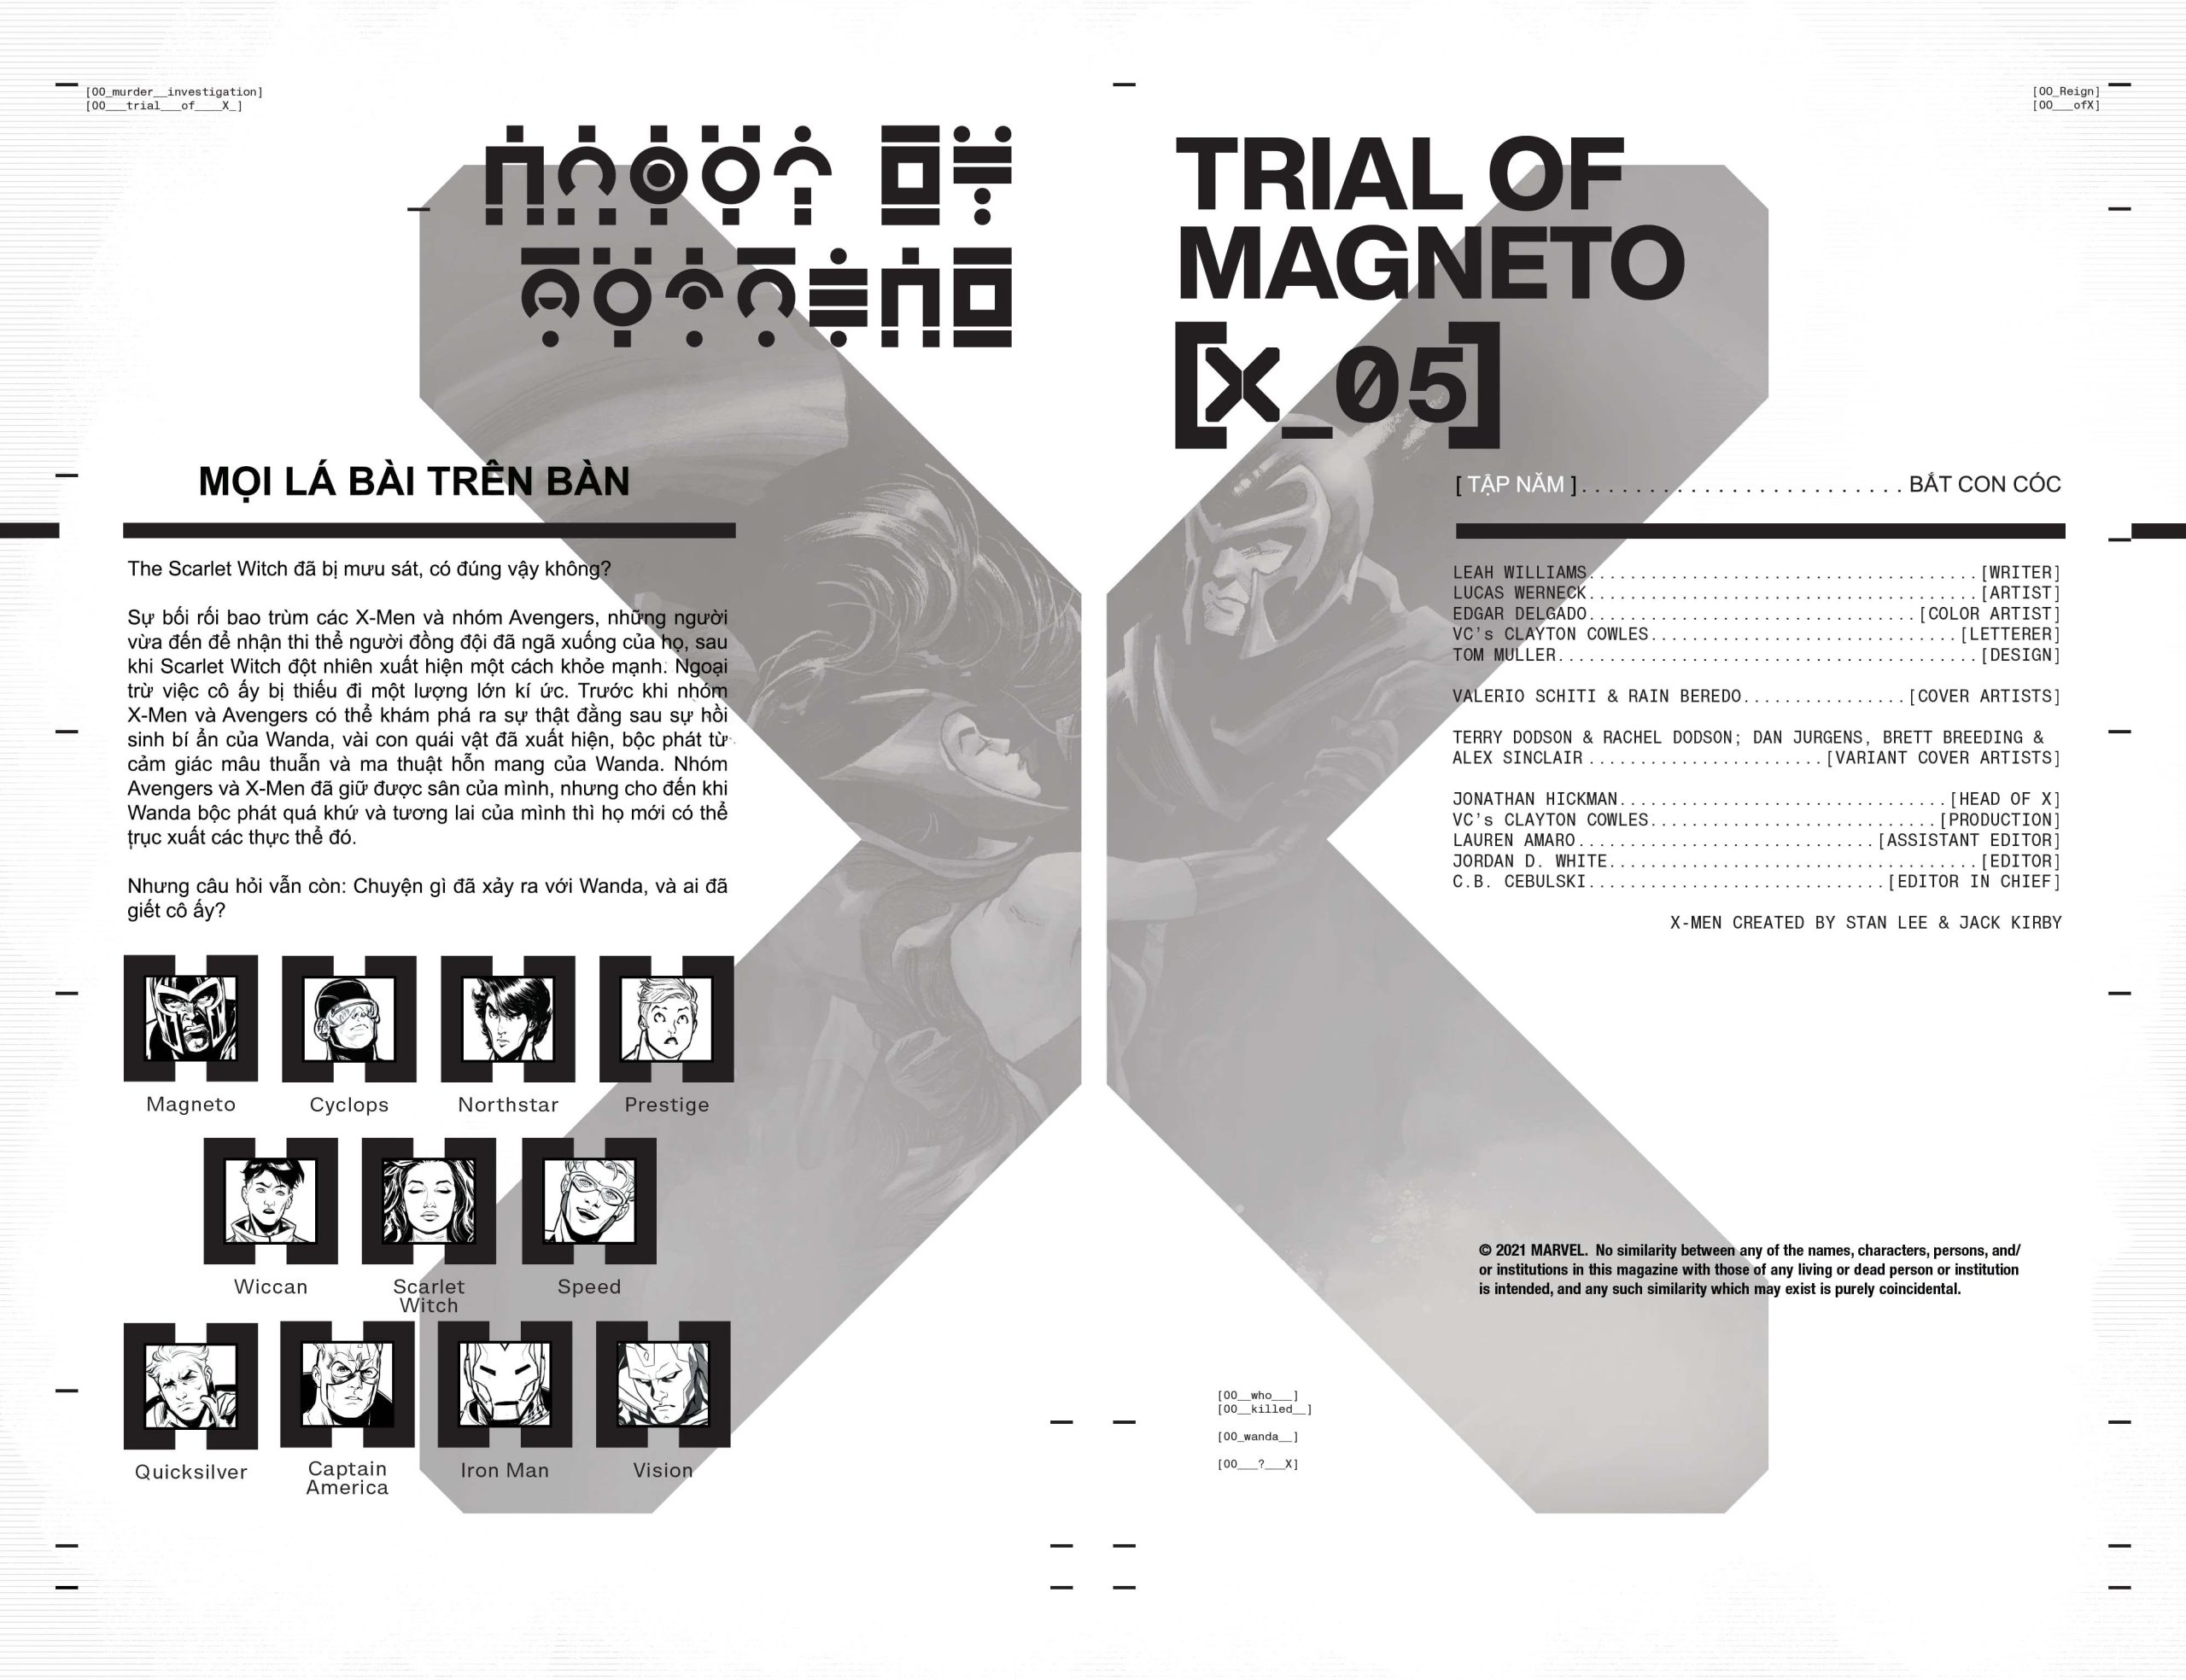 https://langgeek.net/wp-content/webpc-passthru.php?src=https://langgeek.net/wp-content/uploads/2022/04/X-Men-The-Trial-Of-Magneto-2021-05-of-05-002-scaled.jpg&nocache=1